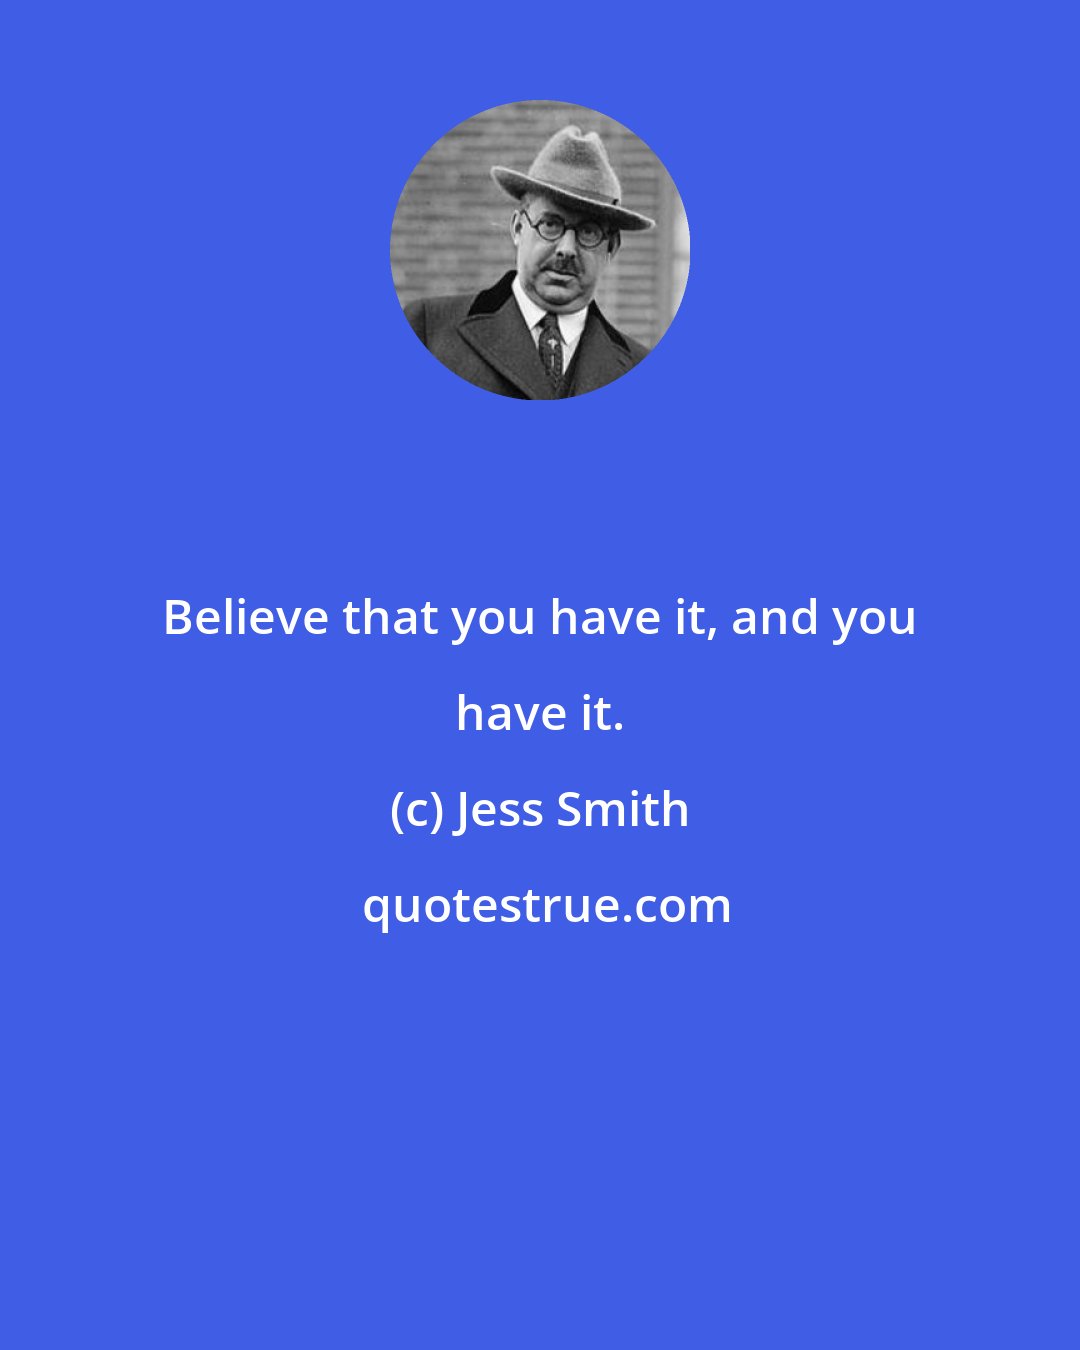 Jess Smith: Believe that you have it, and you have it.